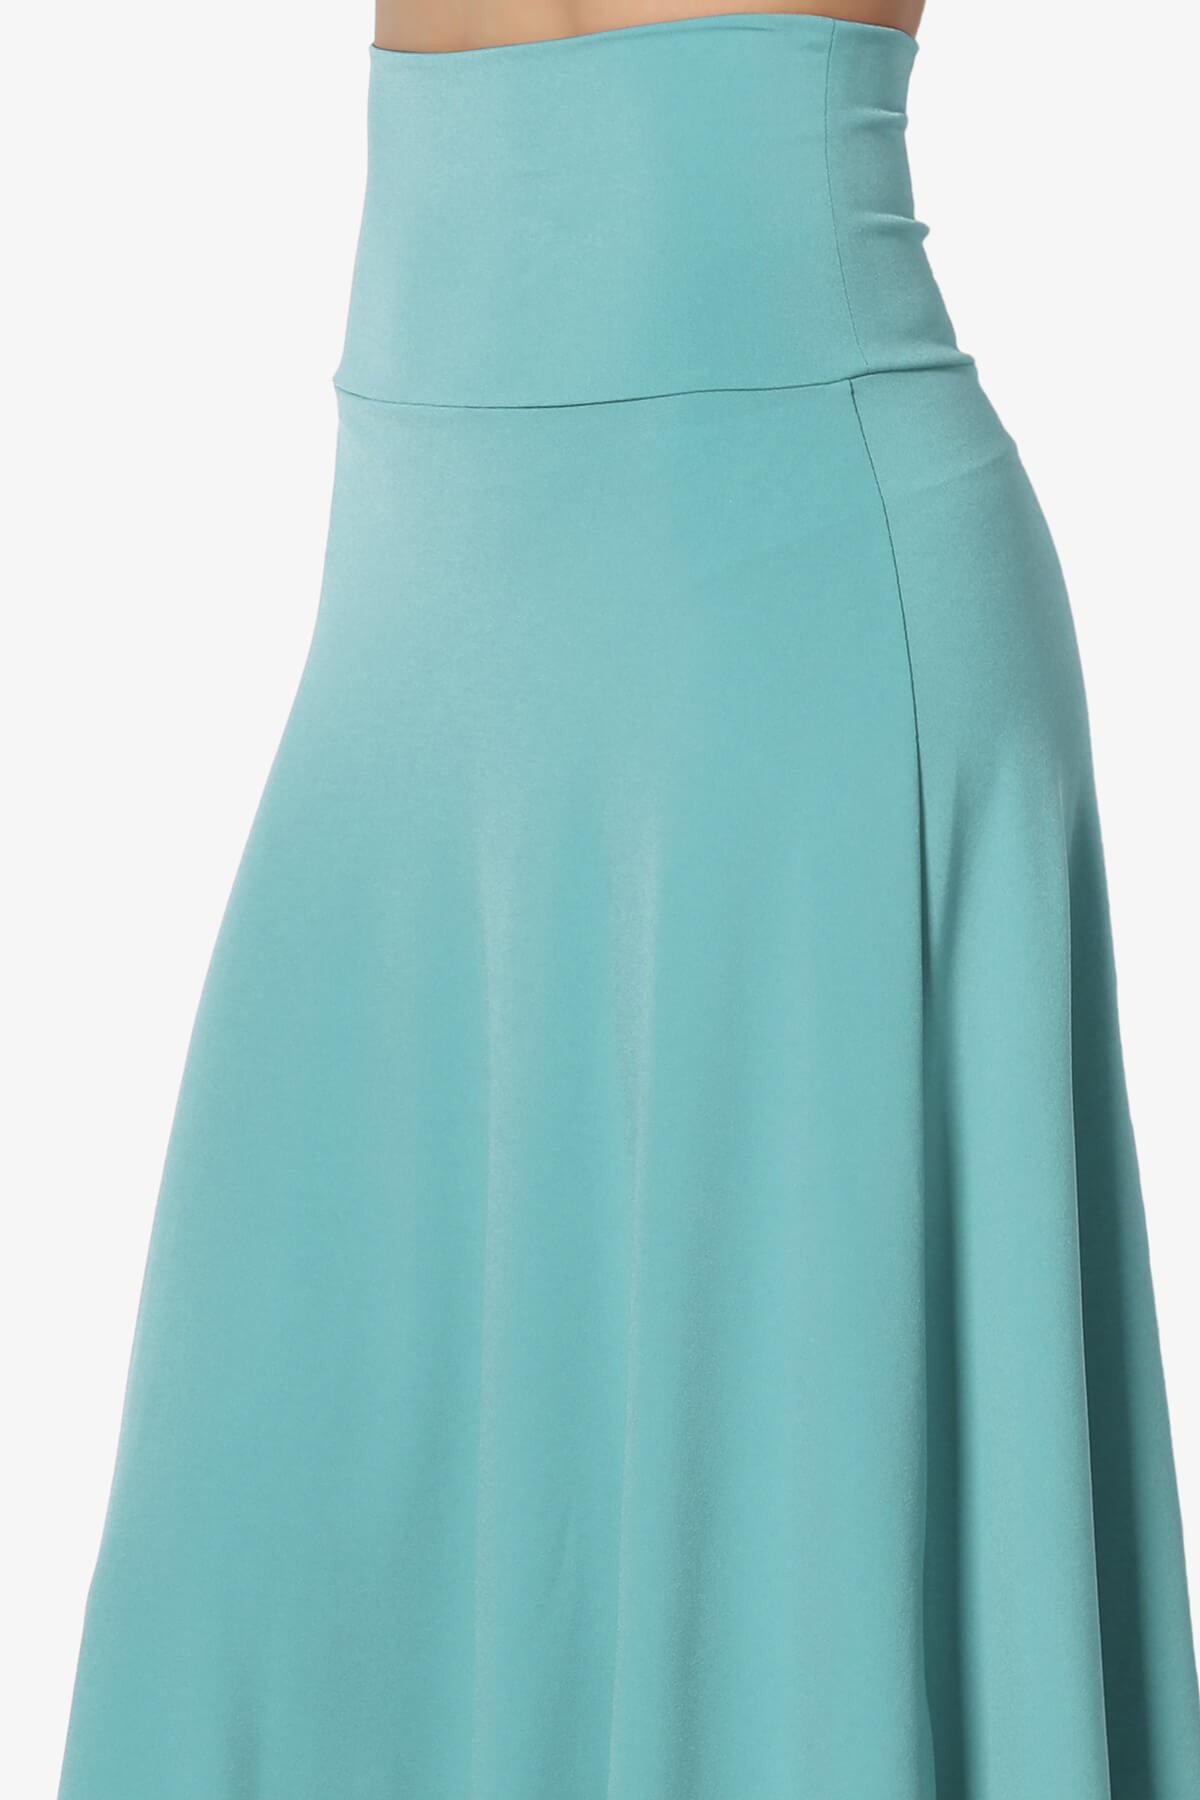 Nolan Stretch Flared Knee Skirt DUSTY TEAL_5